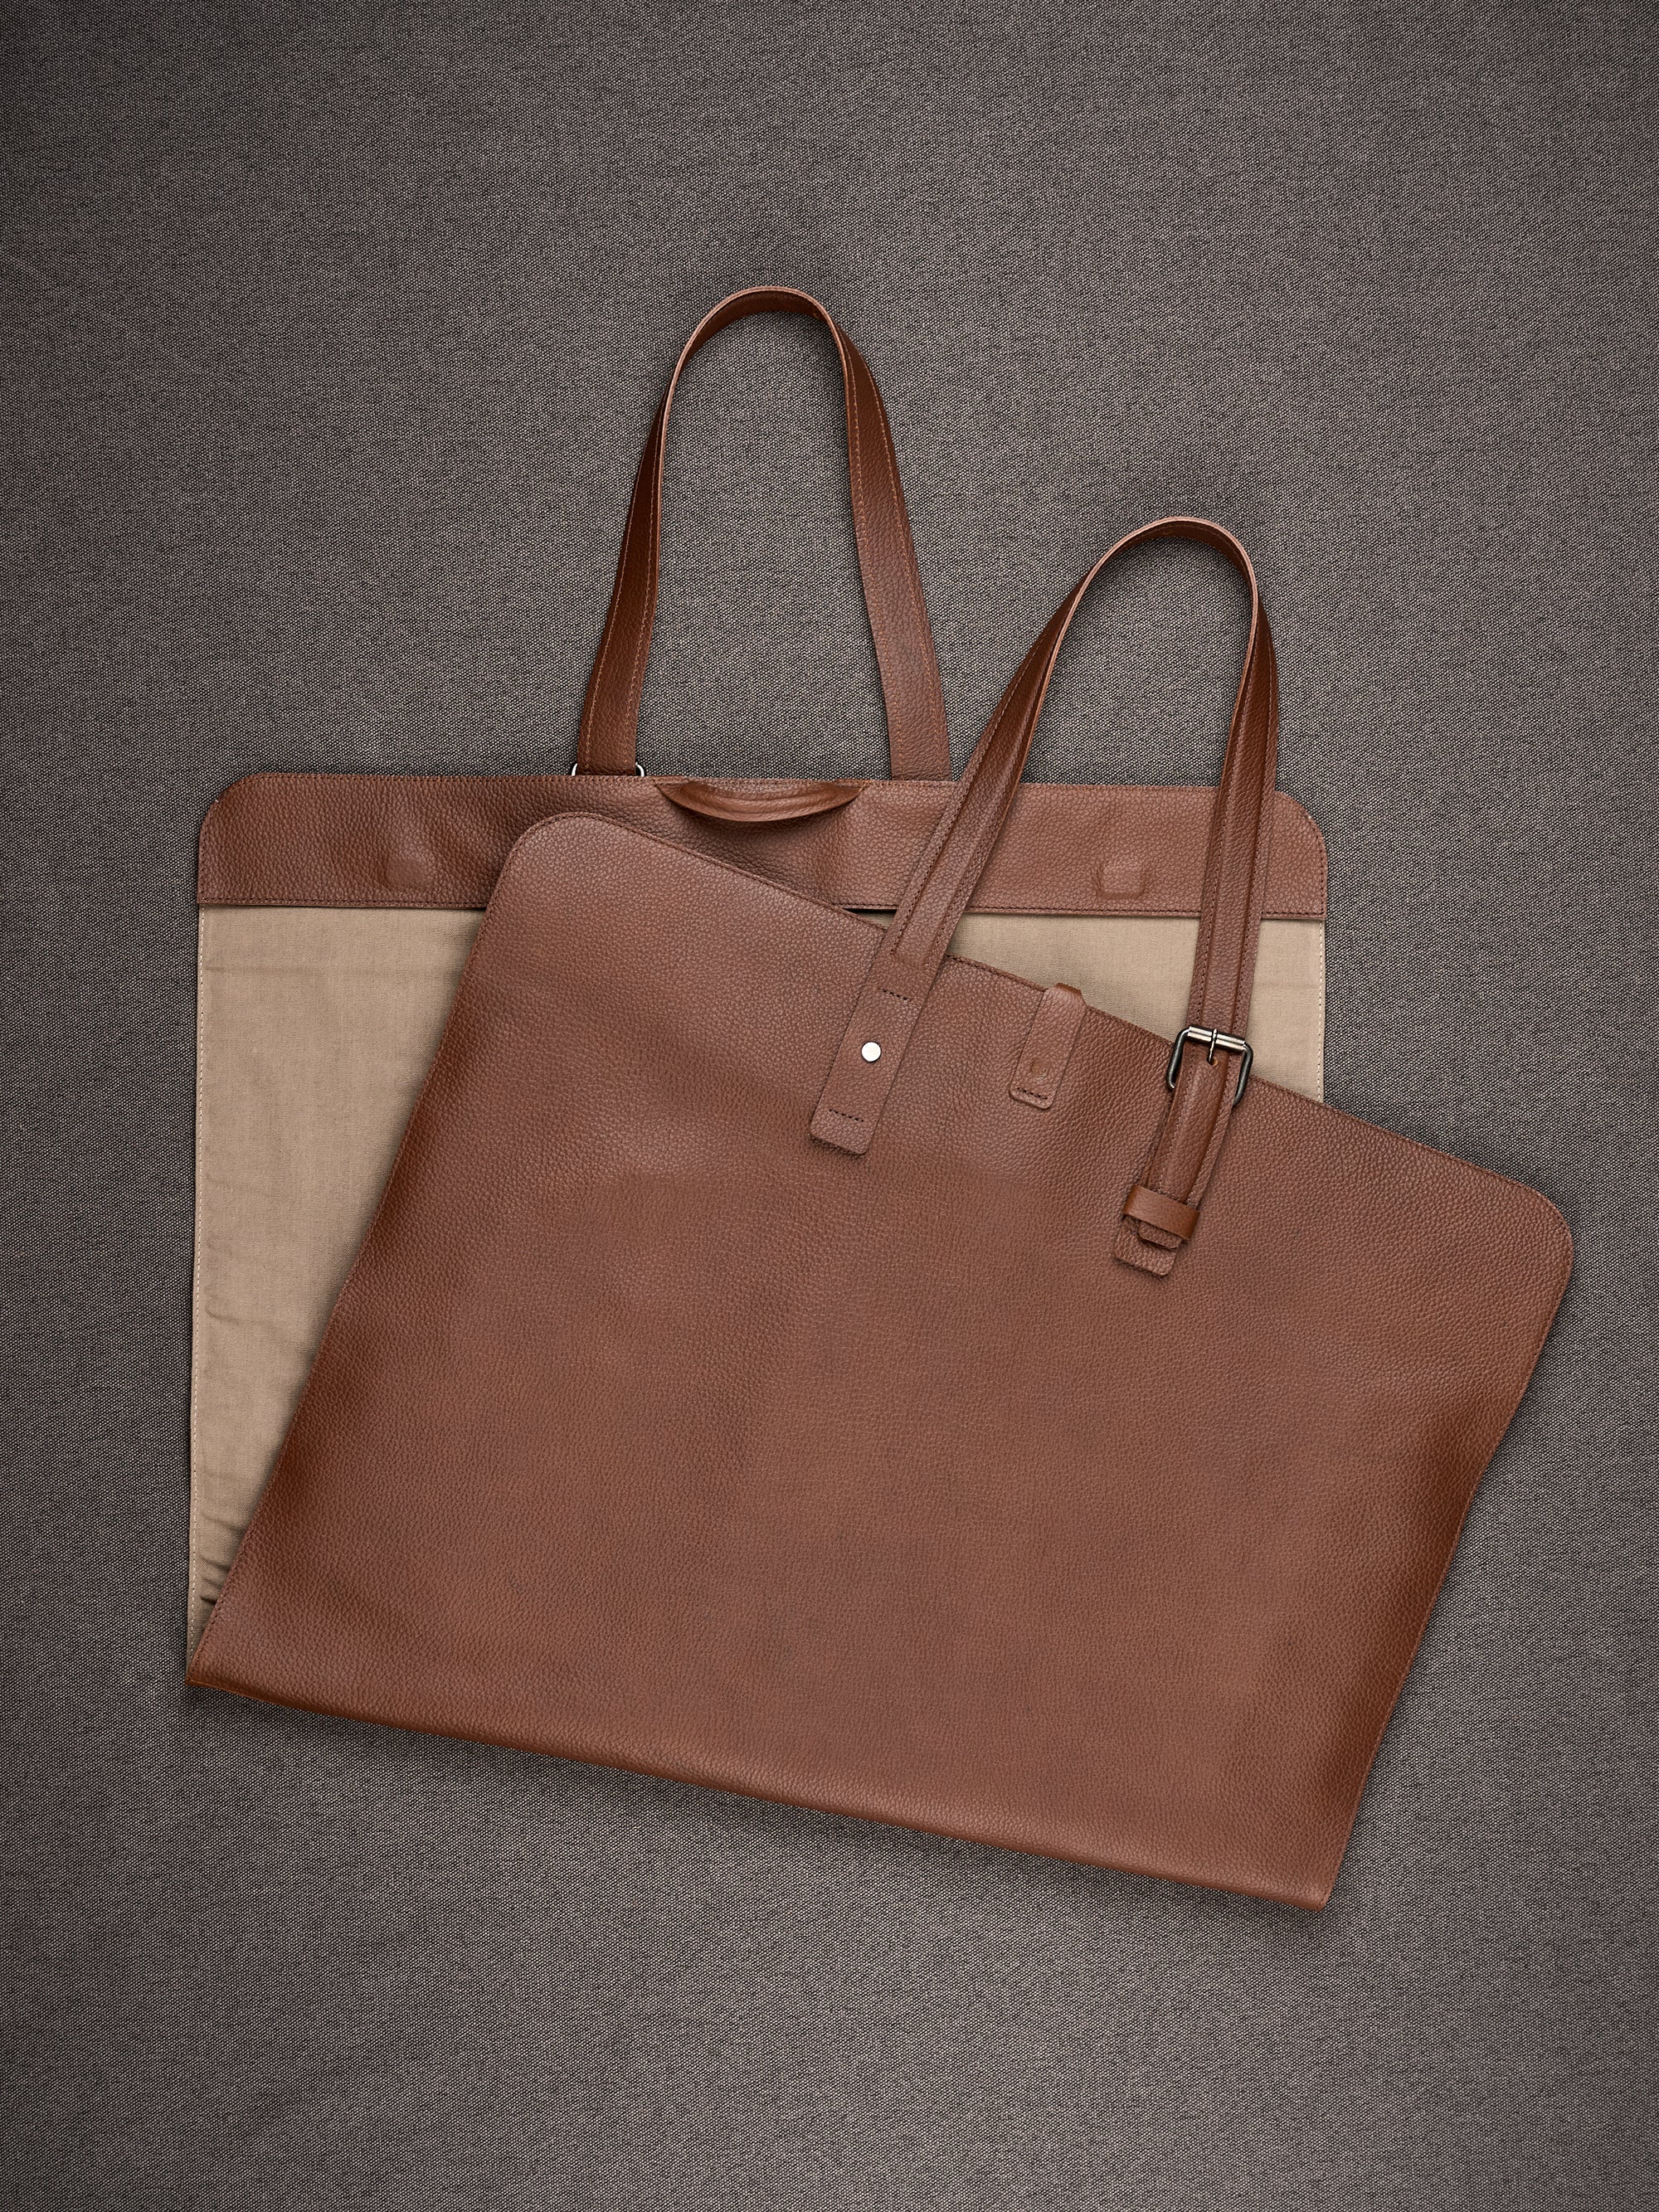 Foldable Suit Bag Brown by Capra Leather